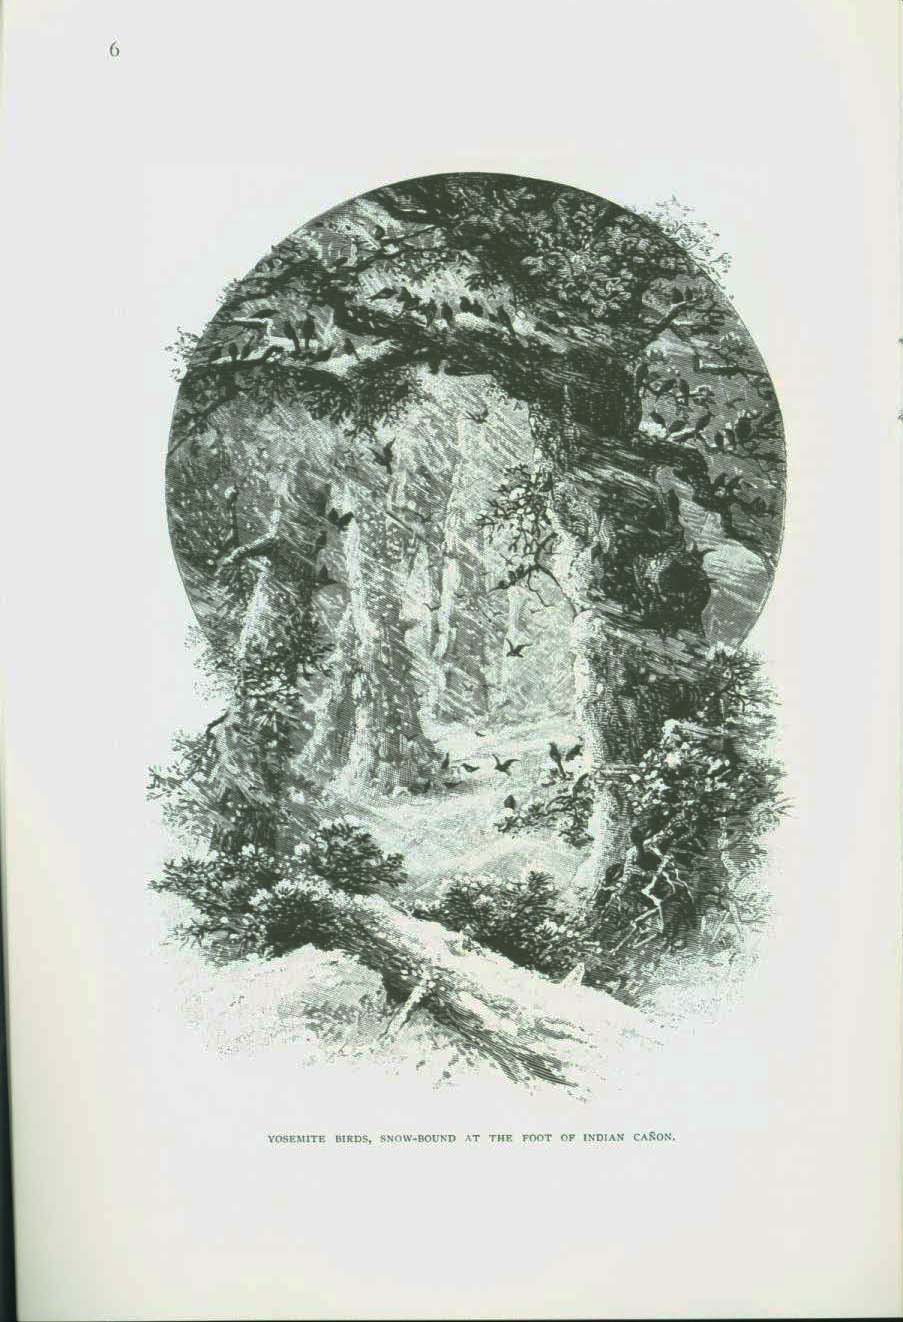 THE YOSEMITE IN WINTER: an 1892 account. vikst0053d